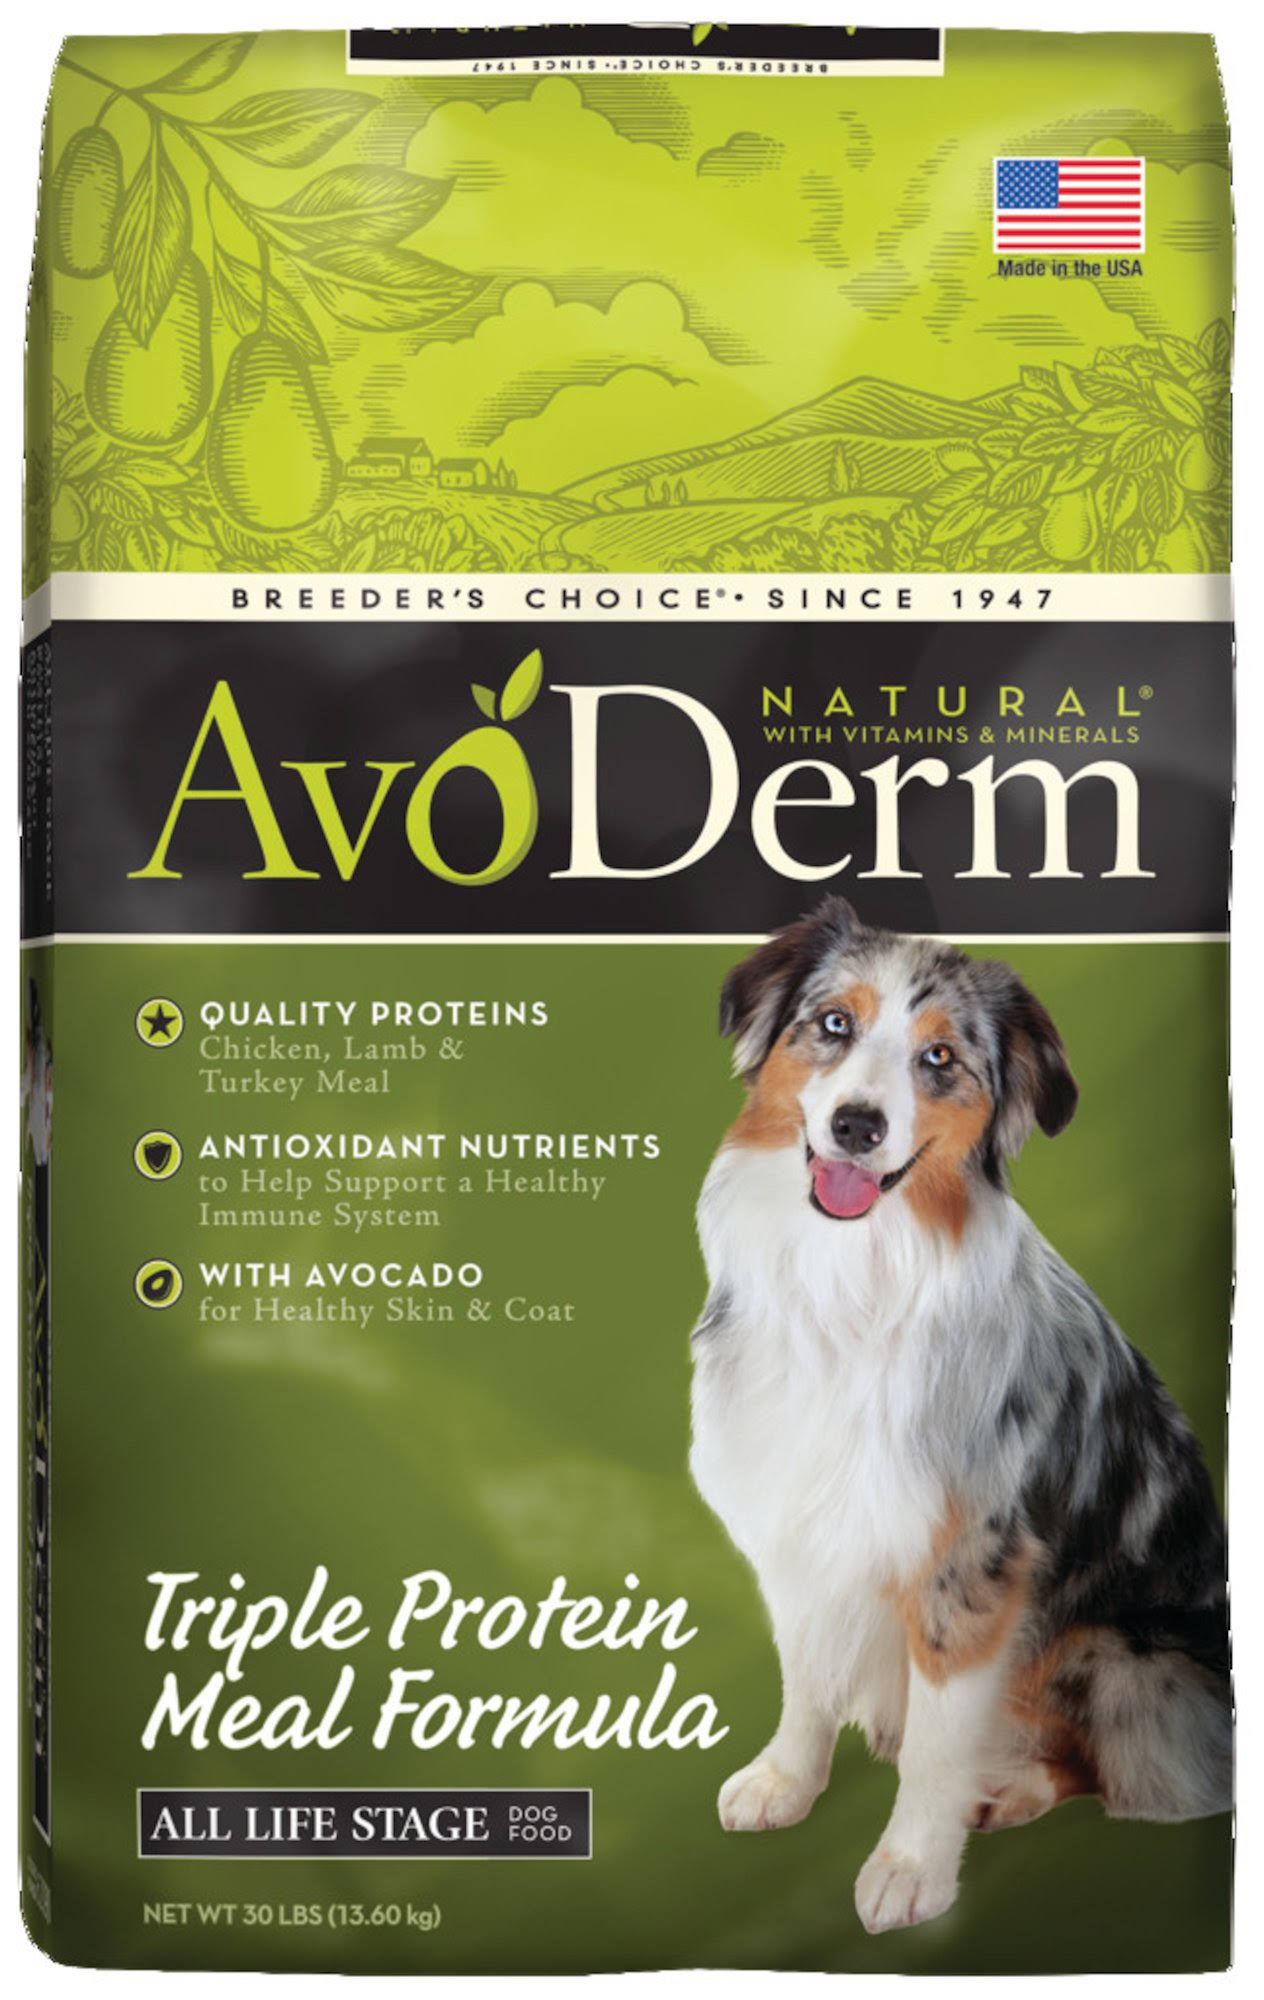 Avoderm Natural Triple Protein Meal Formula Dog Food - 30lbs